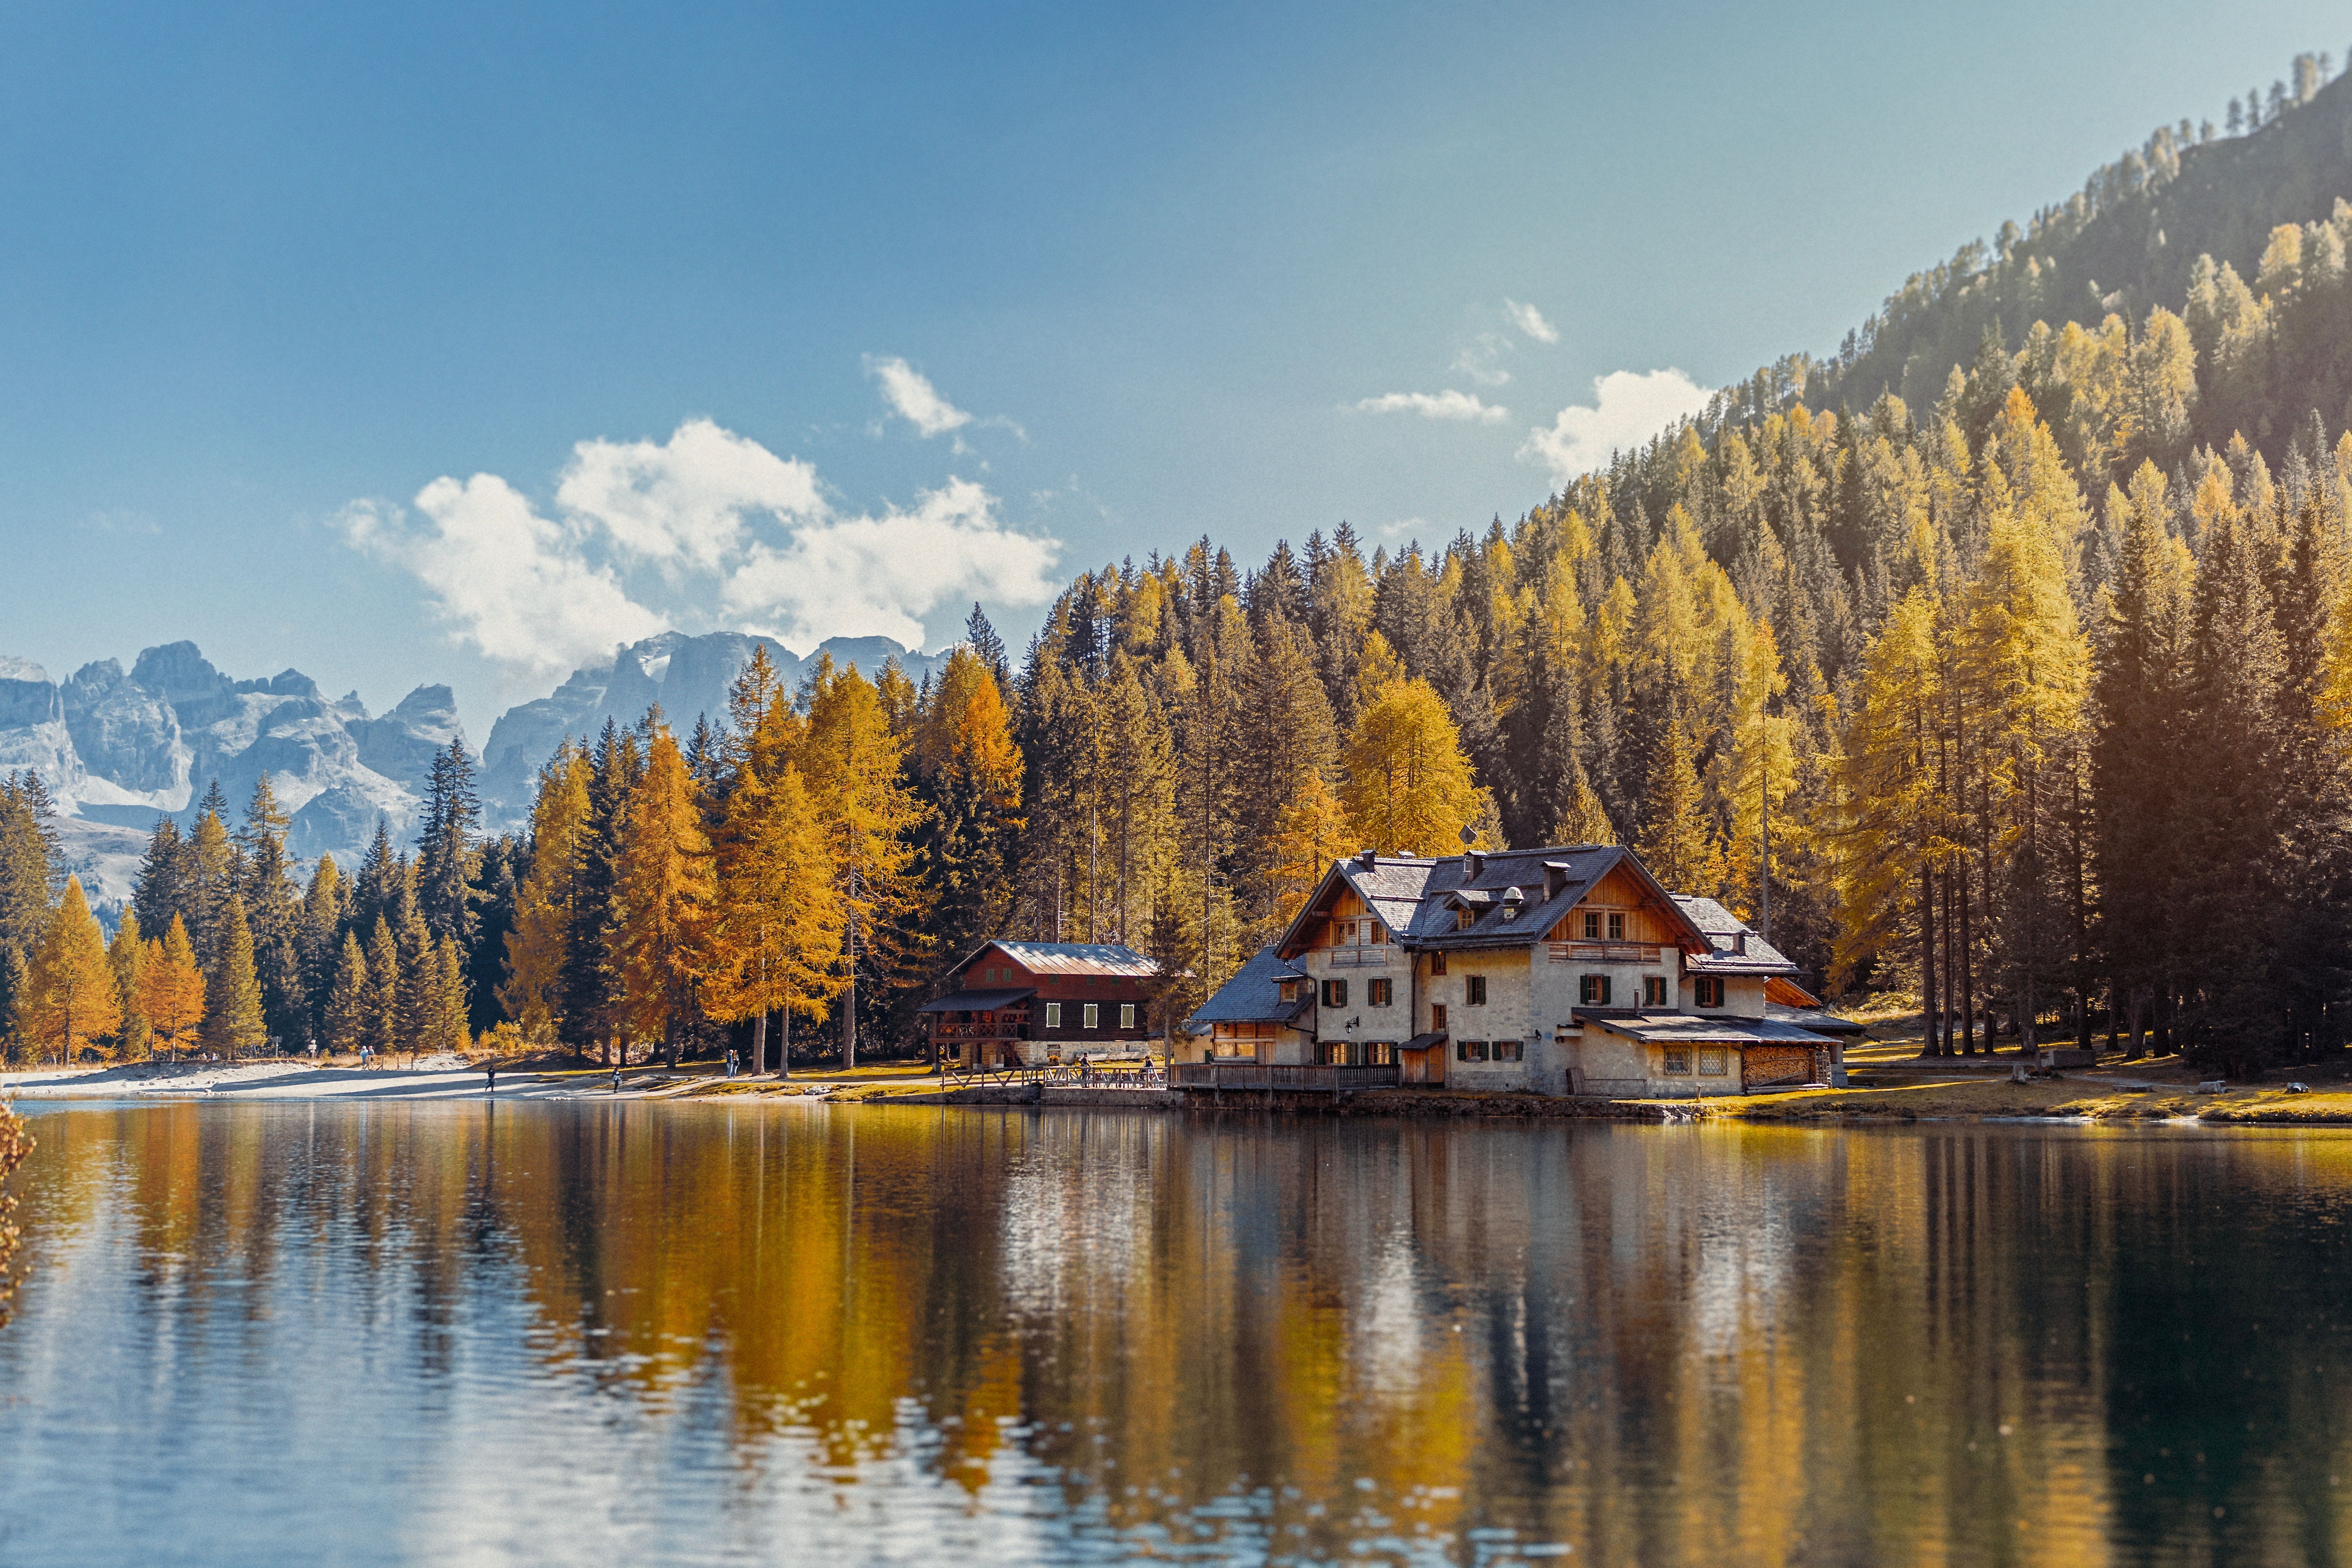 6000x4000 #water, #cabin, #woodland, #outdoor, #scenery, #reflection, #wilderness, #lakehouse, #home, #scenic, #yellow, #autumn, #remote, #lake, #Public domain image, #still, #house, #boathouse, #orange, #forest, #lakeside. Mocah.org HD